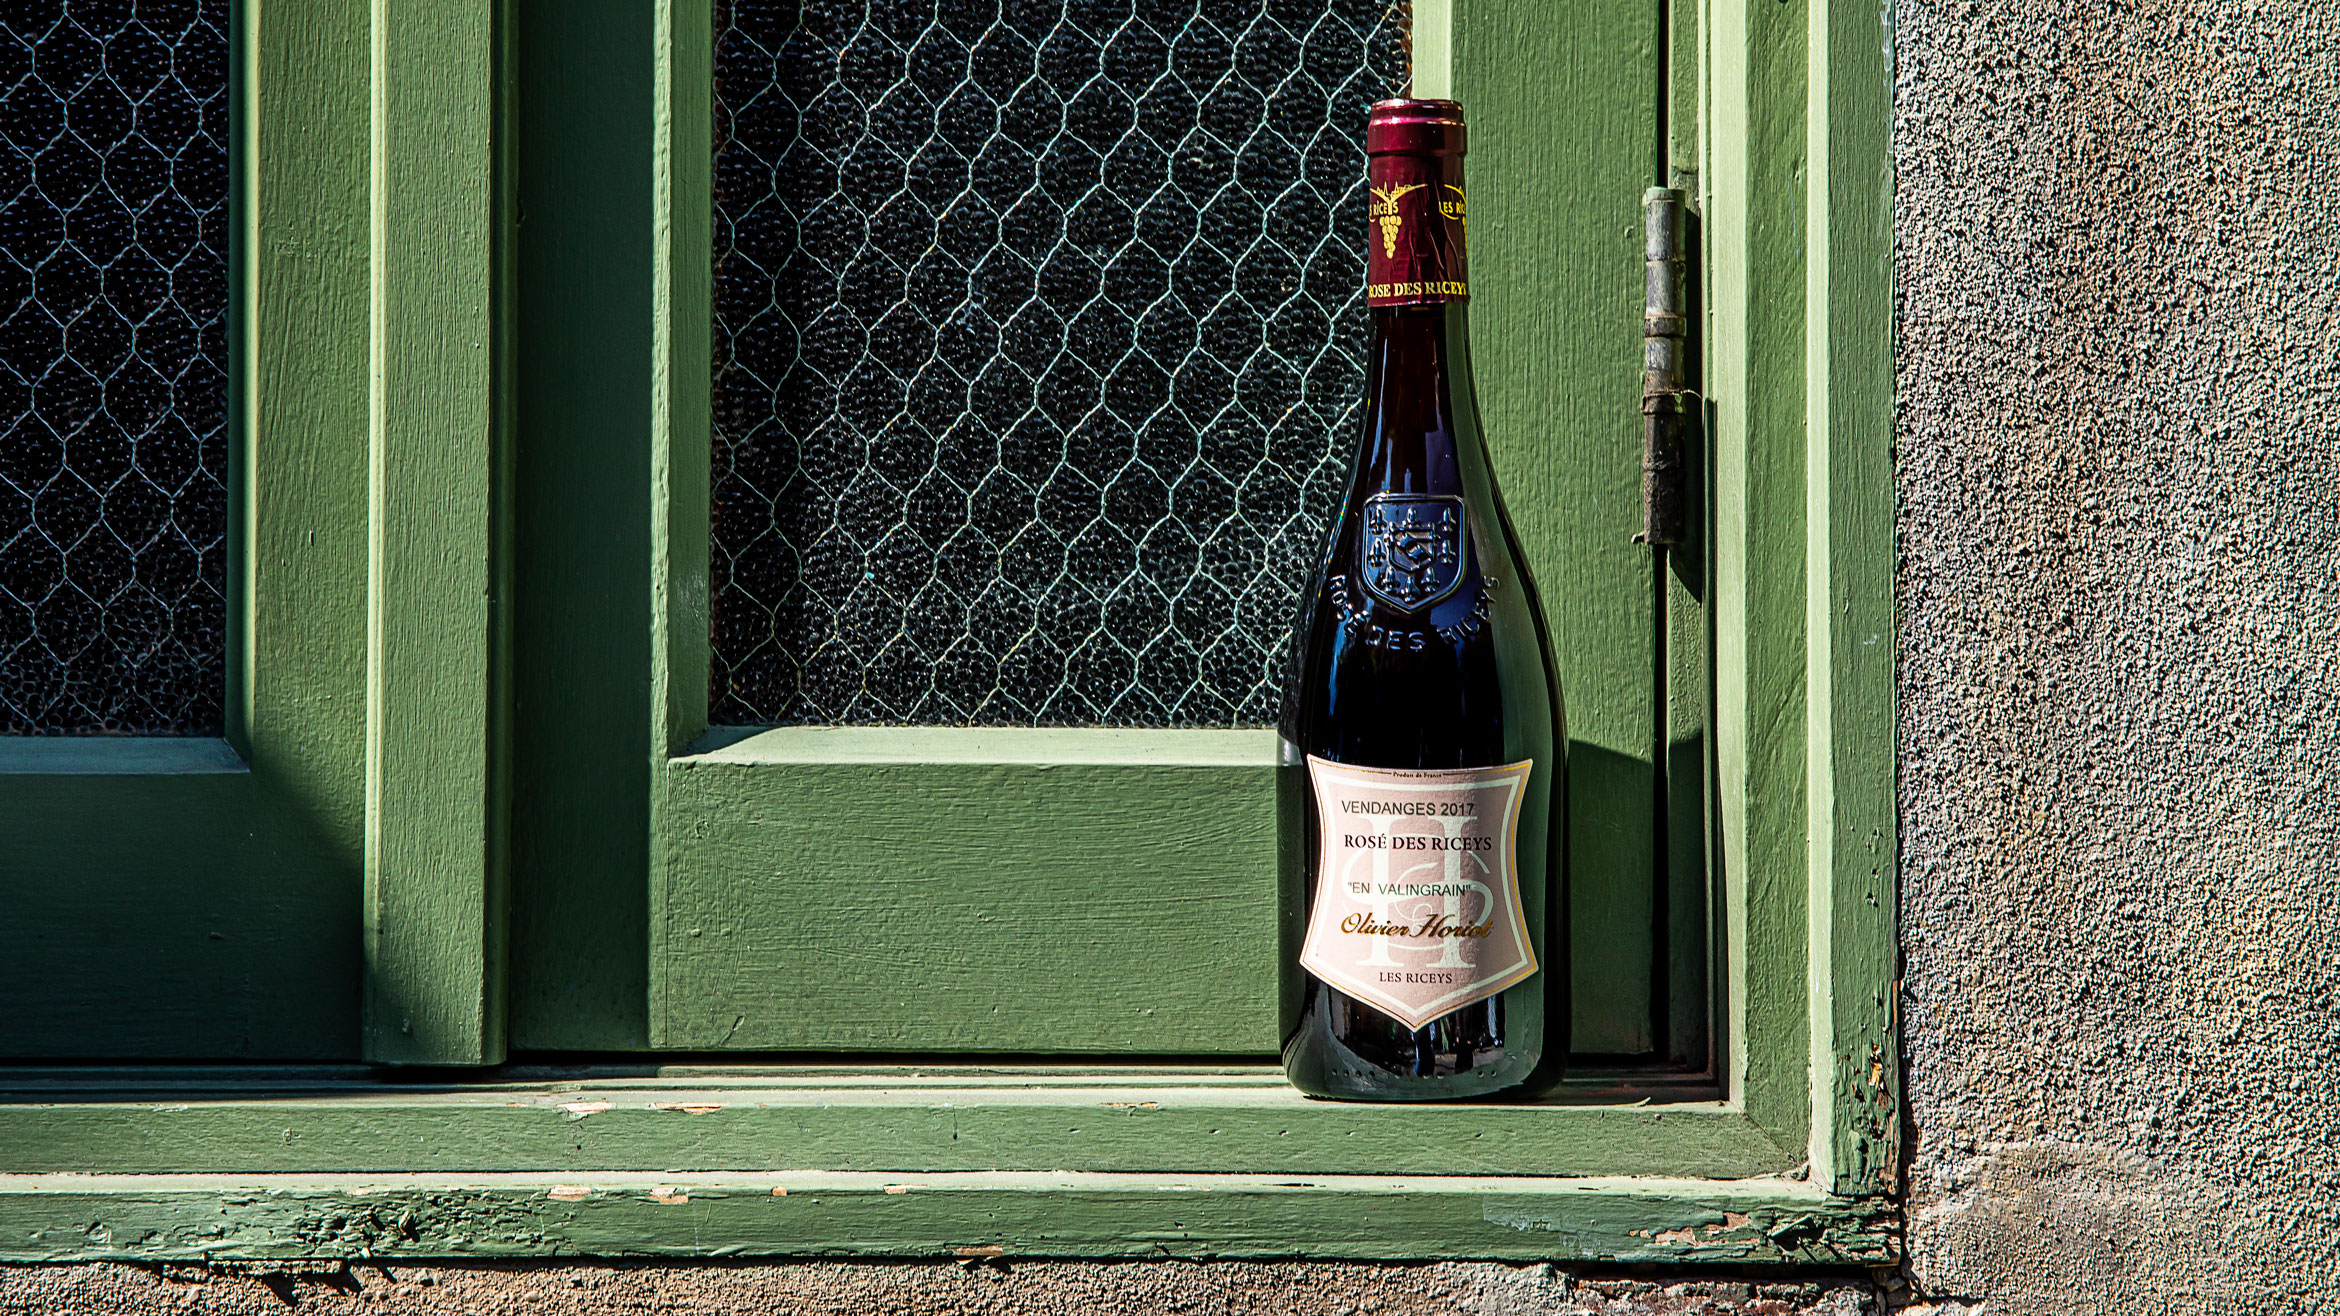 A bottle of wine sits in an exterior wooden windowsill.